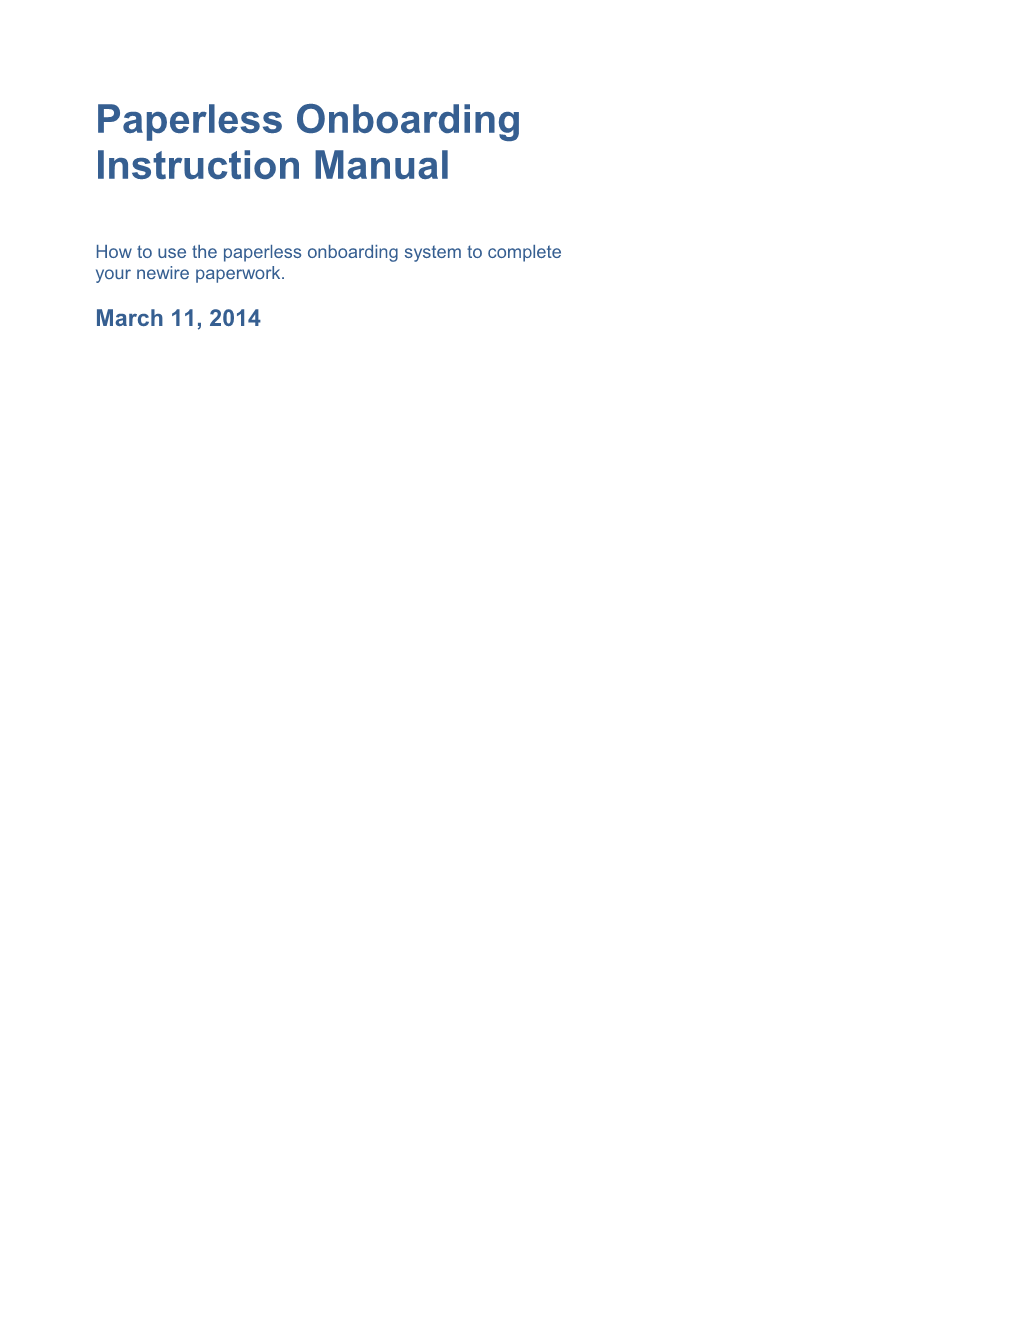 Paperless Onboarding Instruction Manual